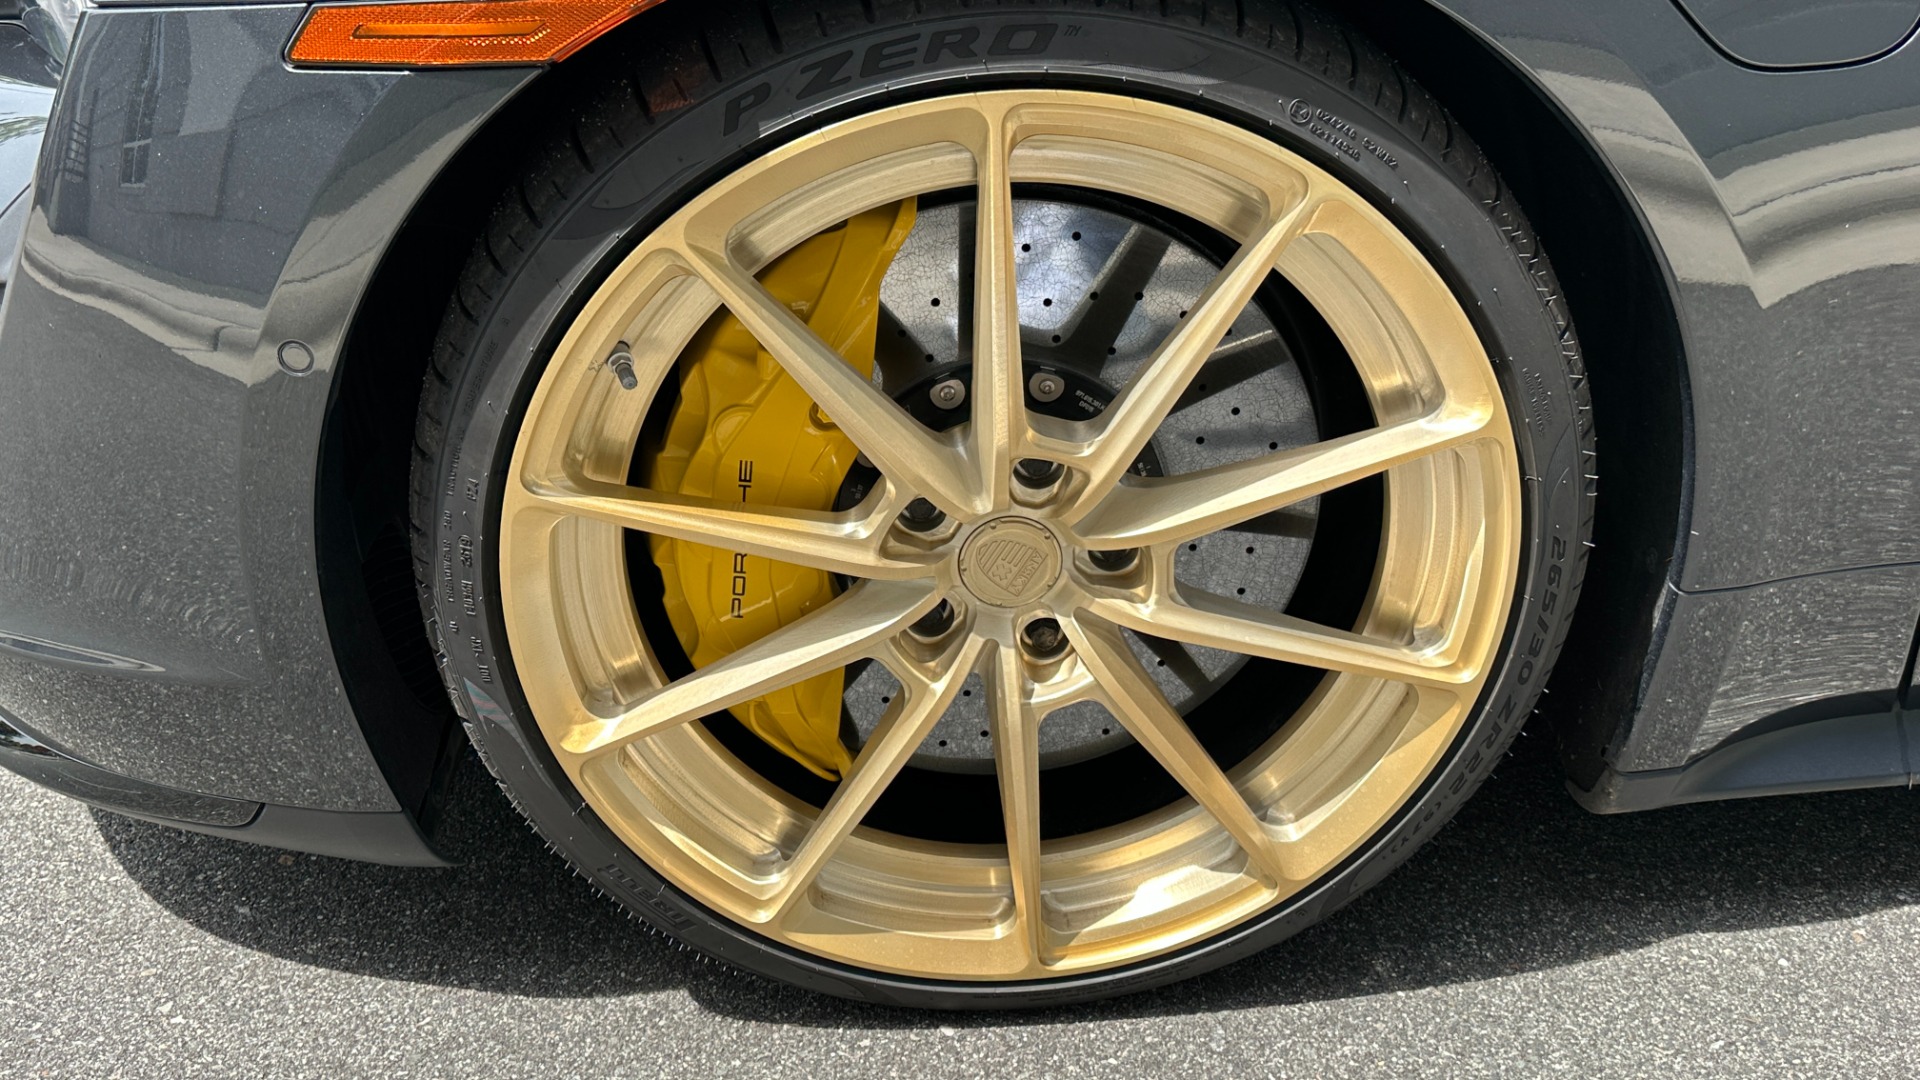 Used 2020 Porsche Taycan TURBO S / ANRKY WHEELS / BURMESTER / PDCC / INNODRIVE for sale $127,999 at Formula Imports in Charlotte NC 28227 55